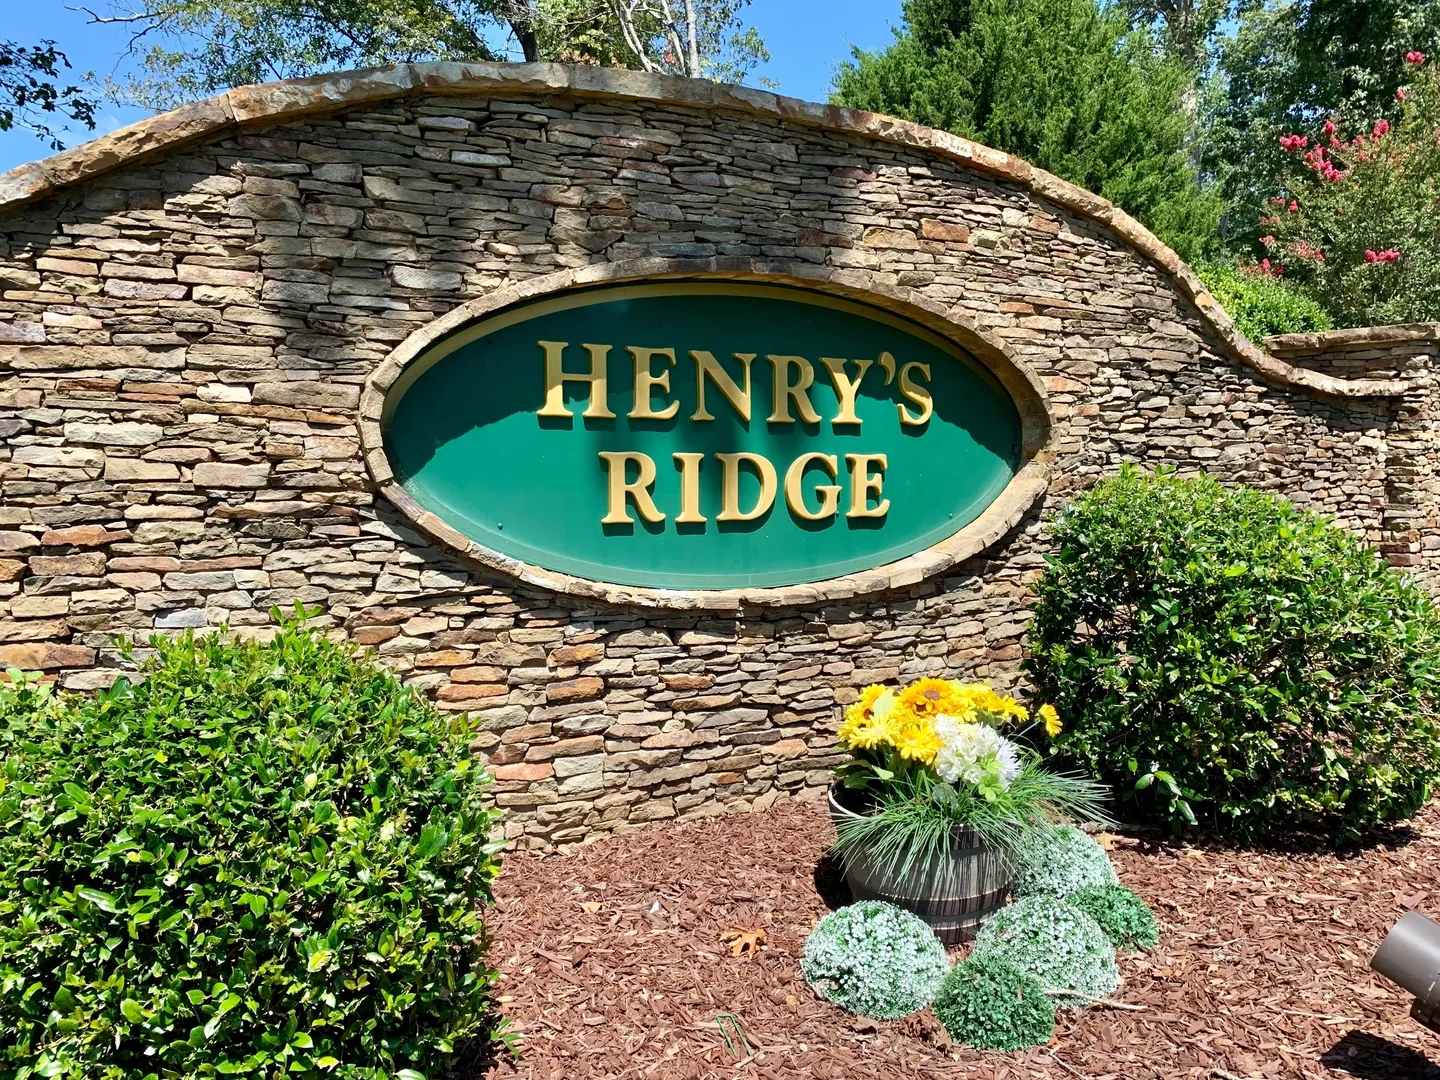 Henrys Ridge Name On a Wall and bushes